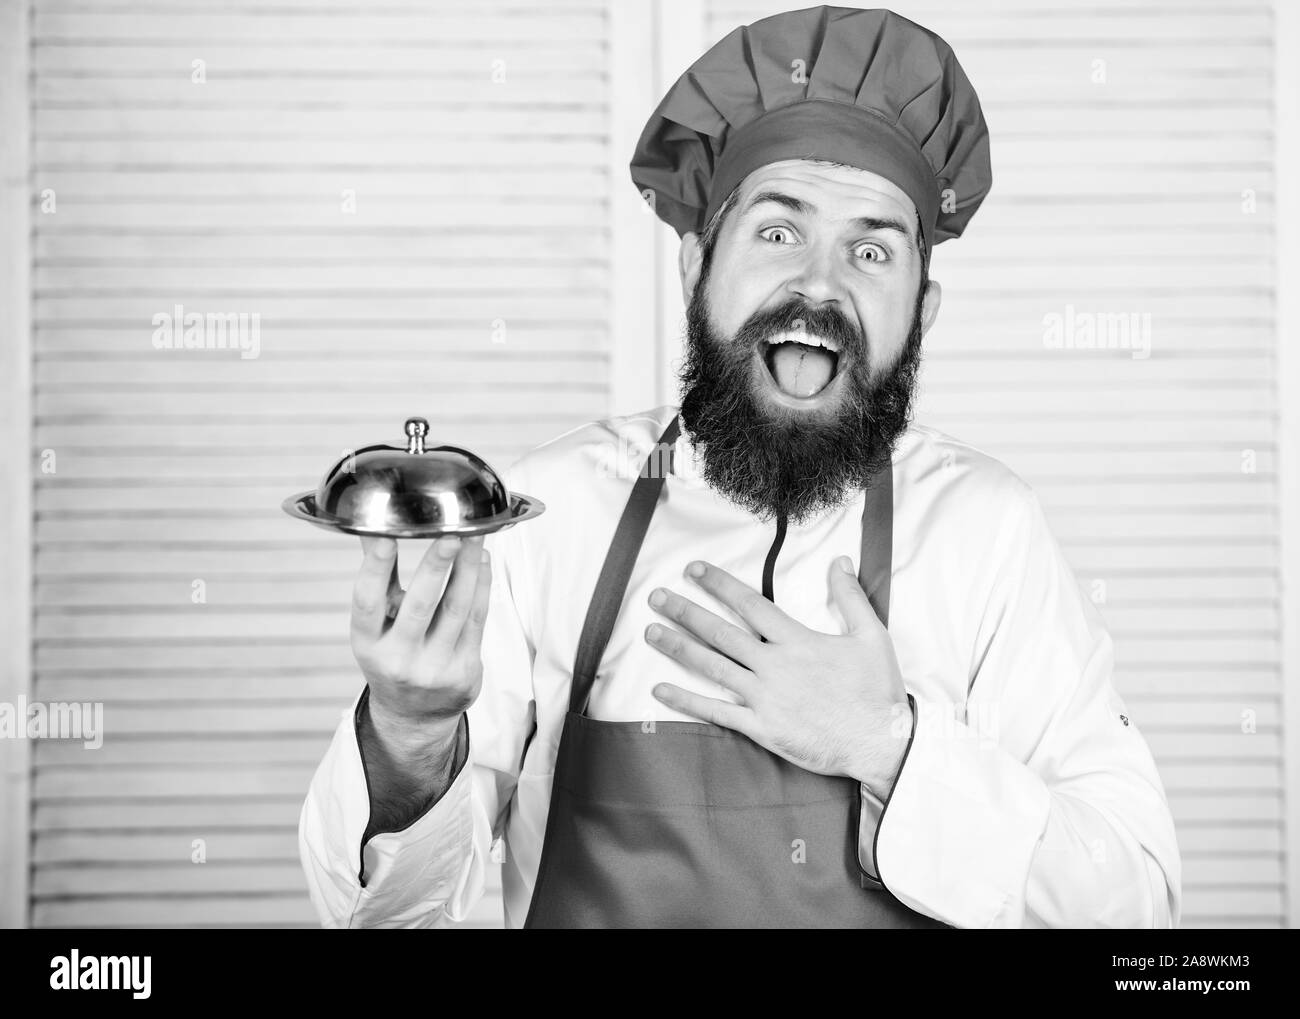 Meticulous food Black and White Stock Photos & Images - Alamy